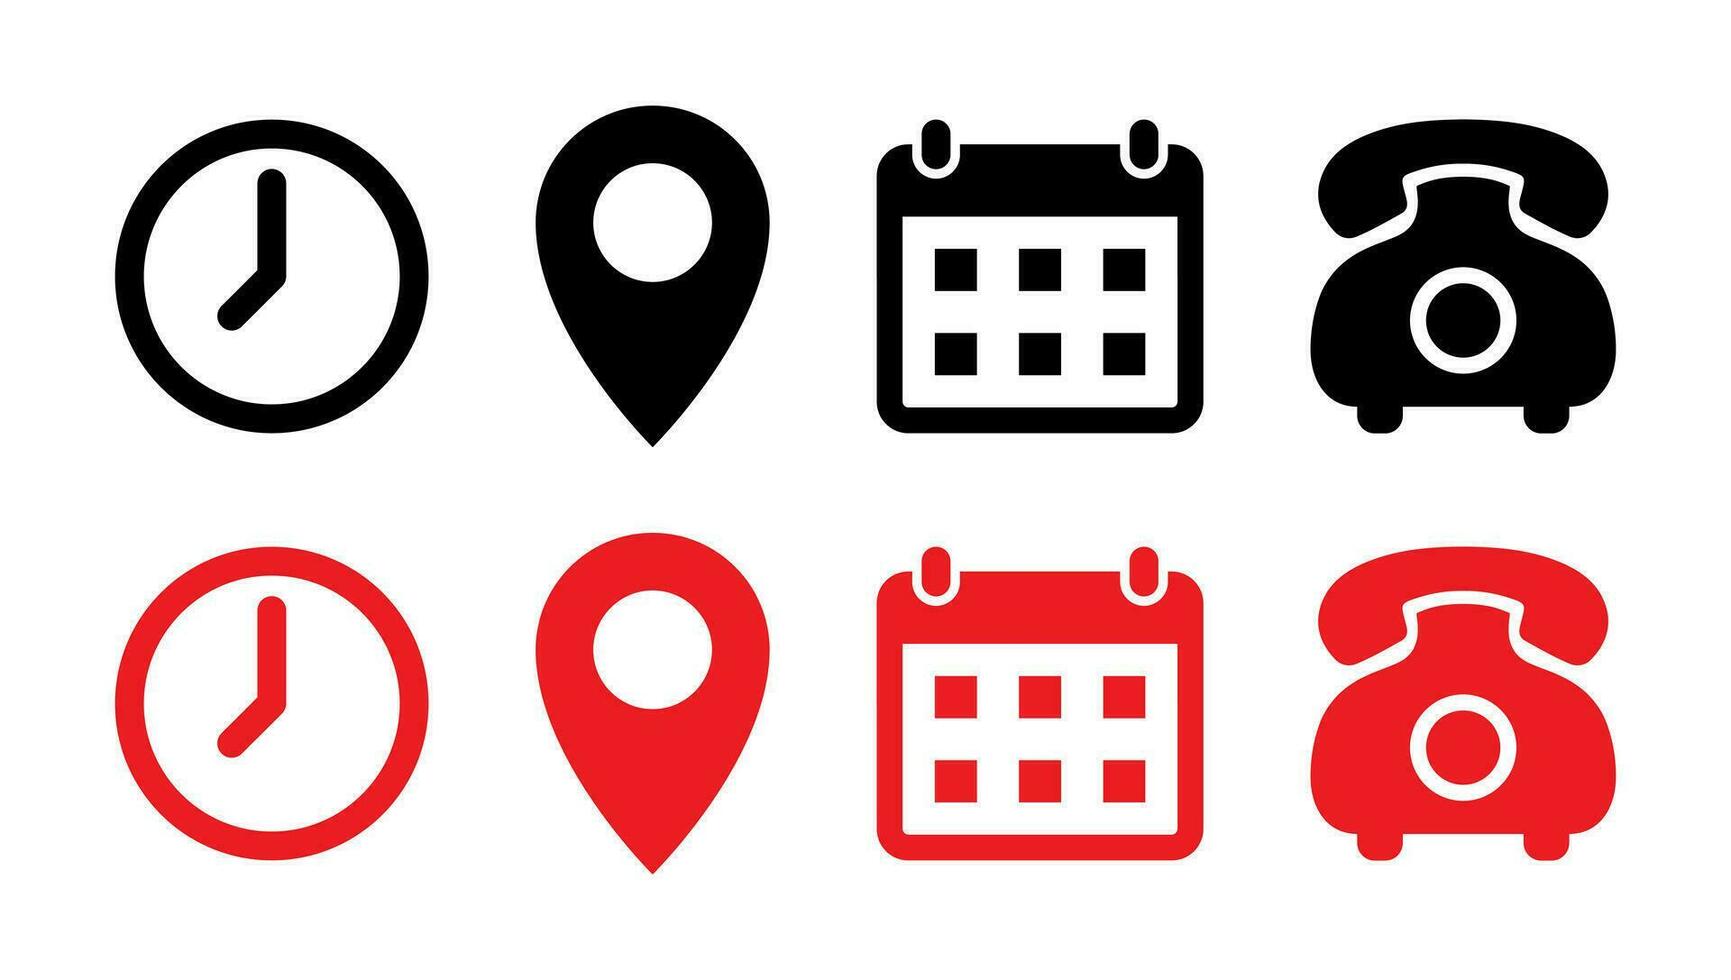 Time, location, date, and contact us icon vector in flat style. Clock, address, calendar, and telephone sign symbol